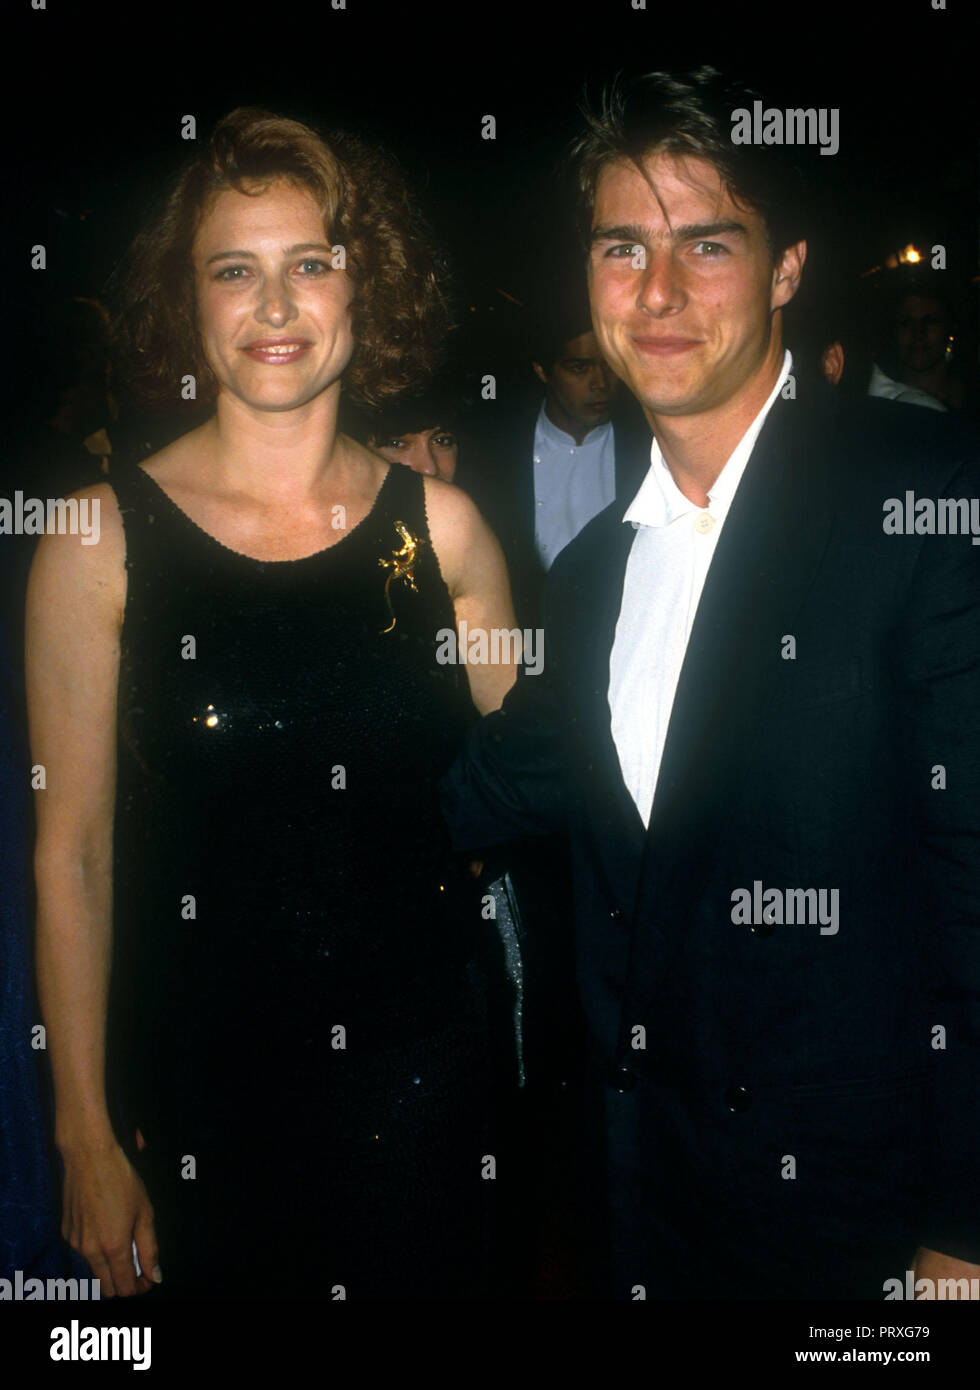 Tom Cruise Tom Cruise And Wife Mimi Rogers Arrive At The Flickr | My ...